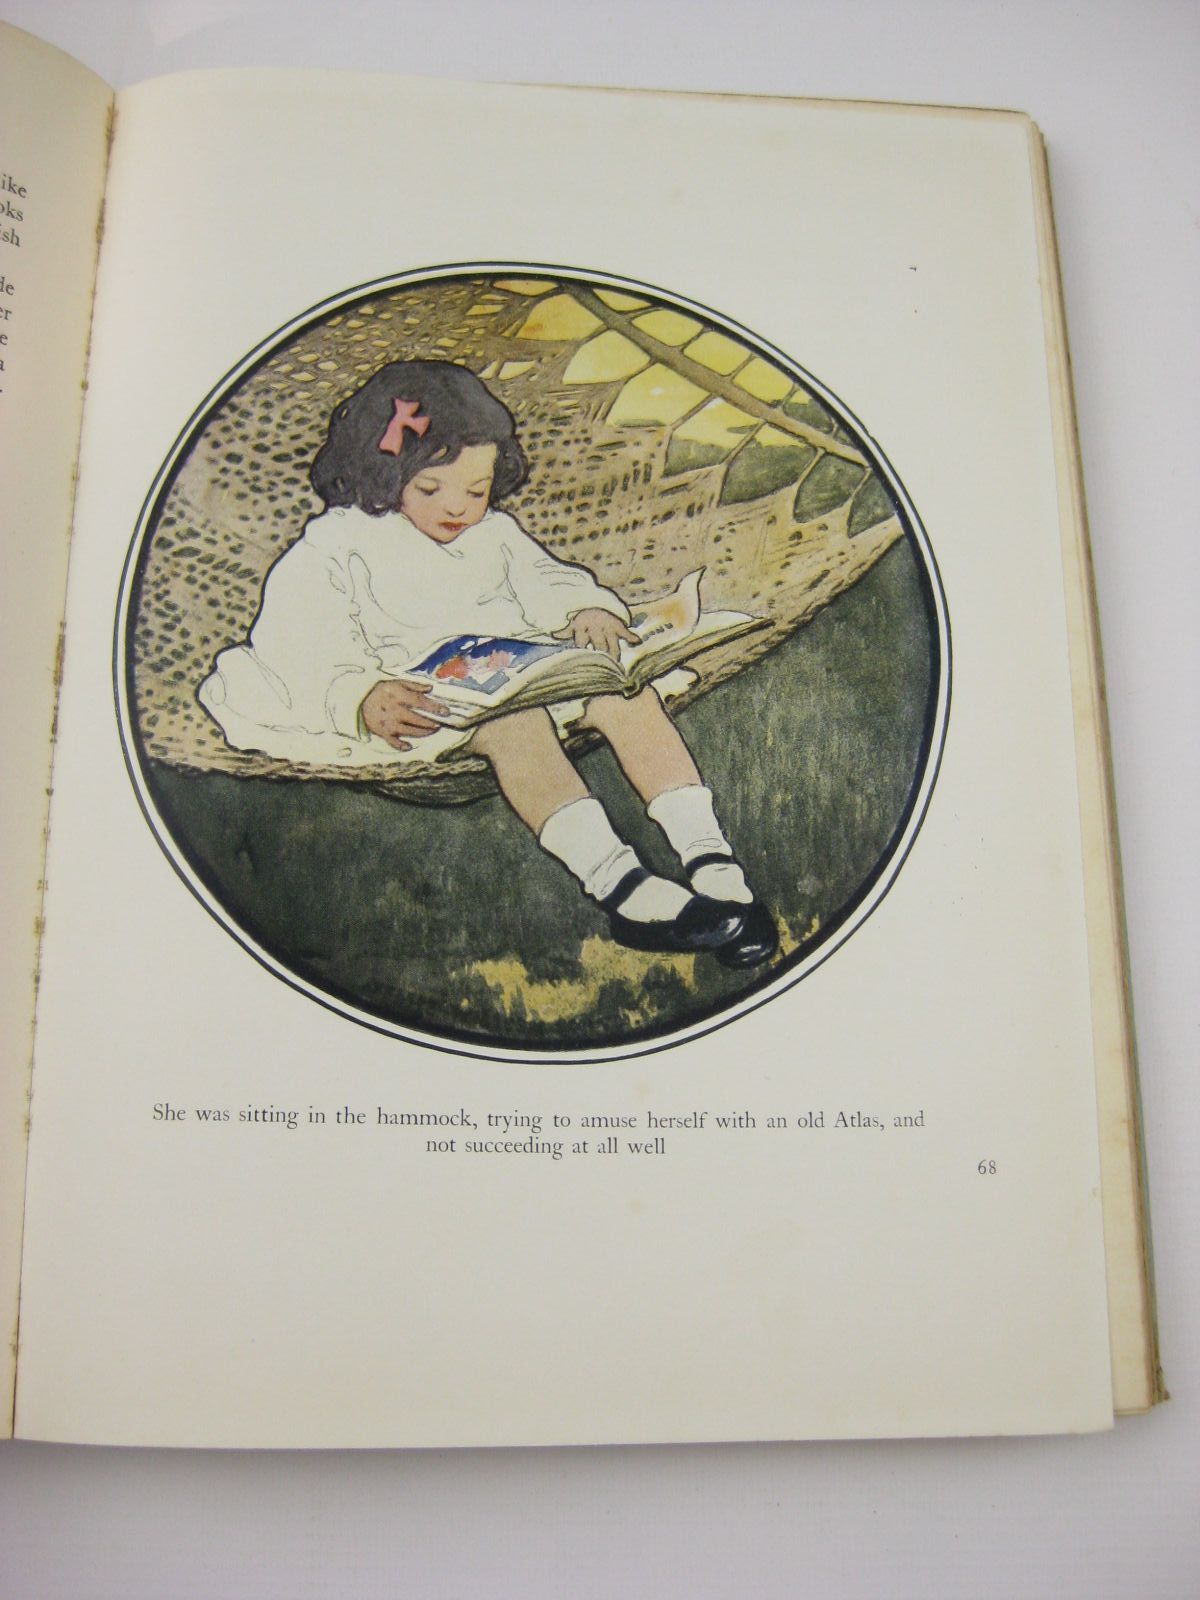 Photo of THE EVERYDAY FAIRY BOOK written by Chapin, Anna Alice illustrated by Smith, Jessie Willcox published by J. Coker & Co. Ltd. (STOCK CODE: 710687)  for sale by Stella & Rose's Books